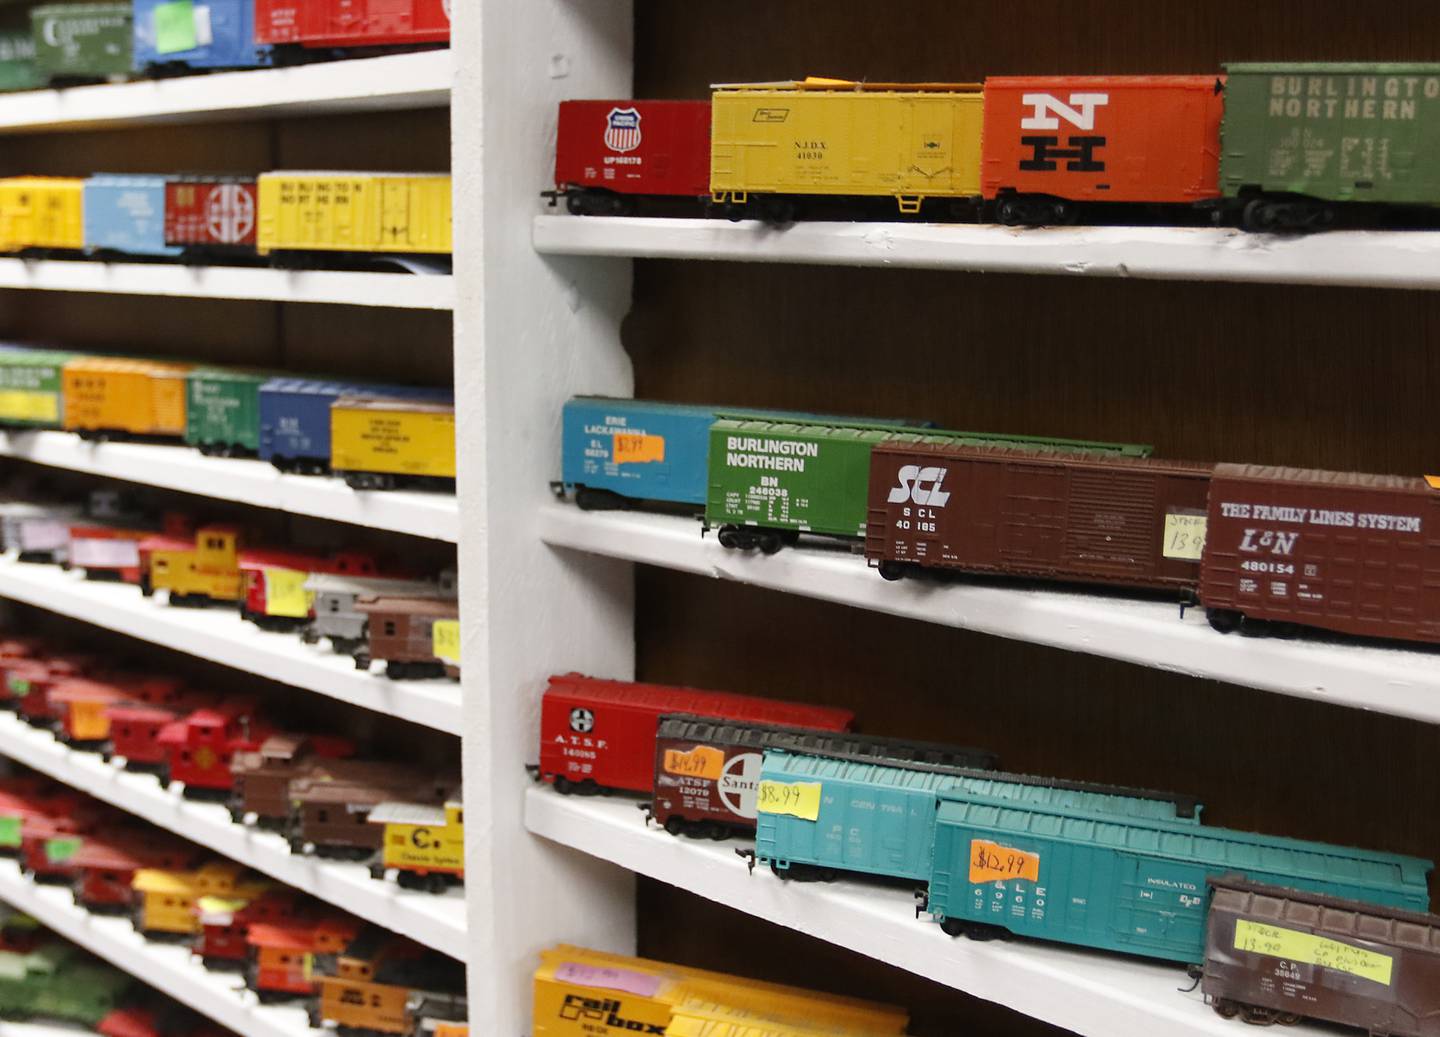 Train cars for sale at M.D. Trains in Woodstock. The model train and die-cast car shop has been fixture on the Woodstock Square for a few years and draws visitors in to check out the rotating display of trains in the front window.